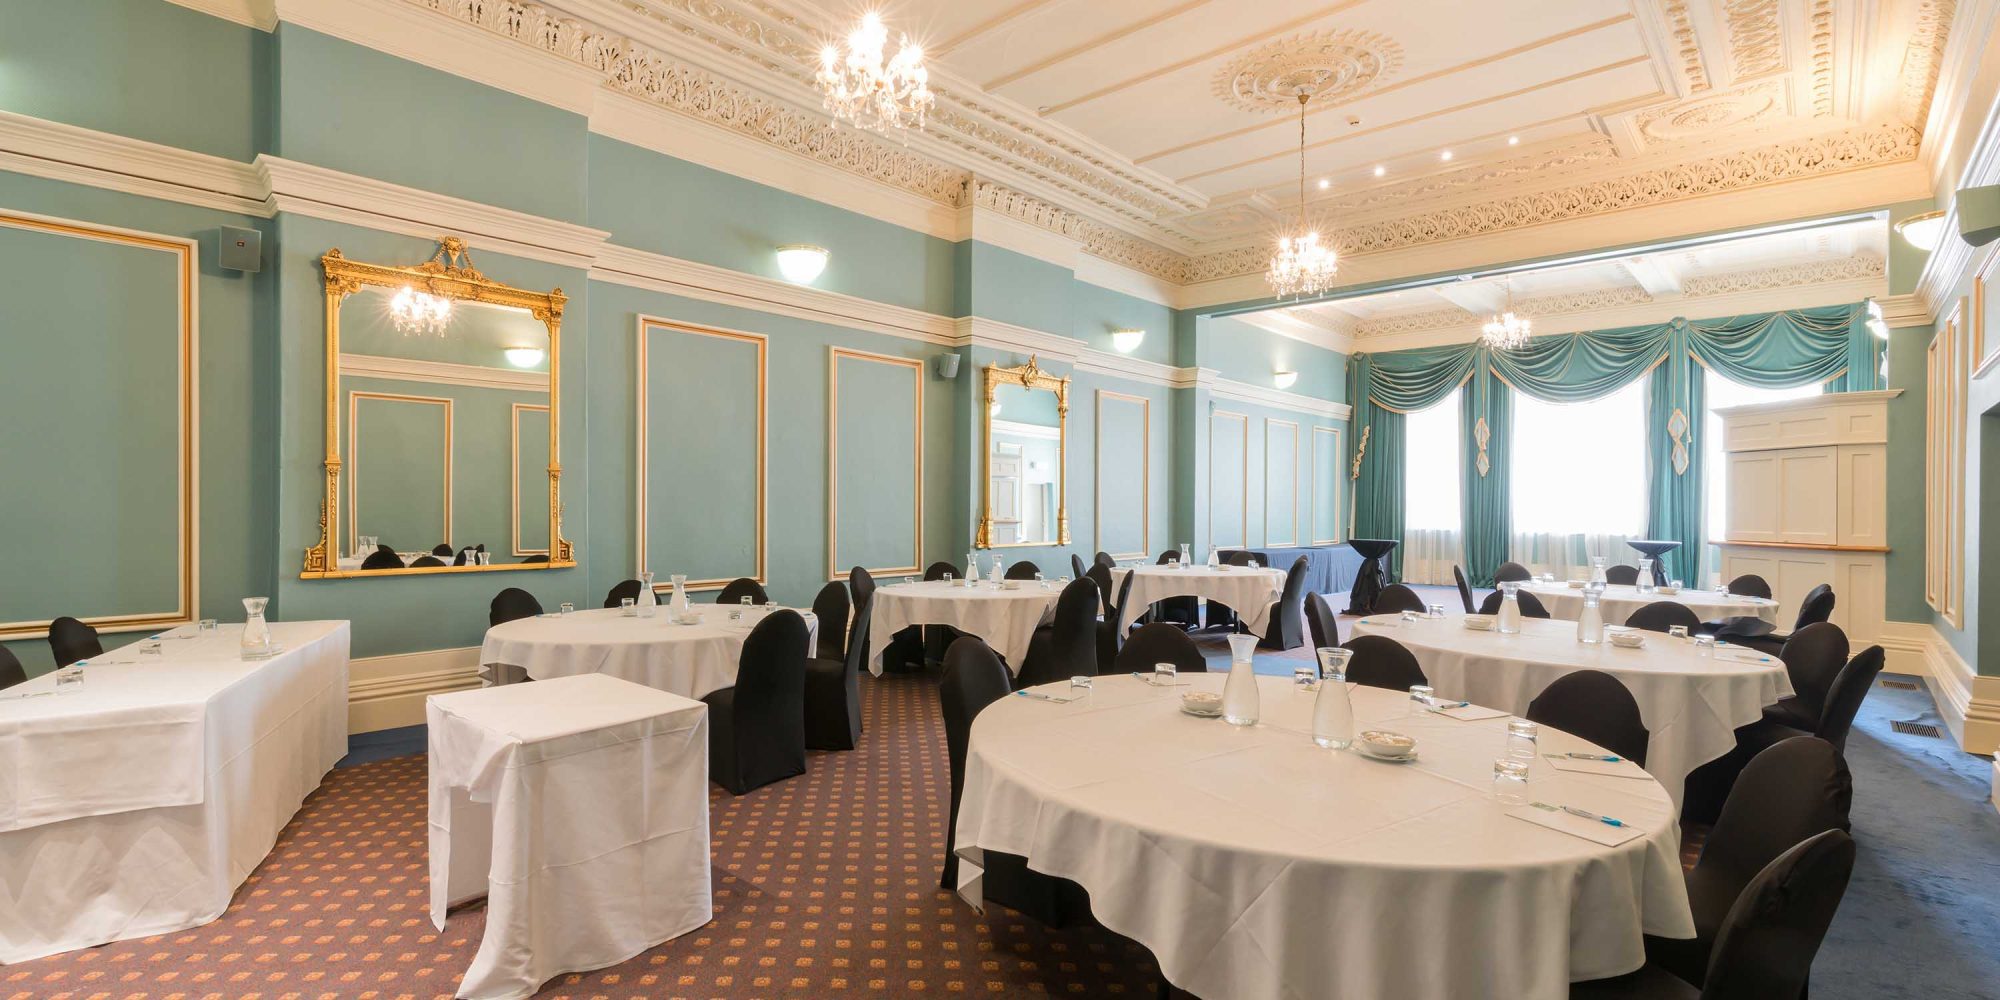 Scenic-Hotel-Southern-Cross-Dunedin-Conference-Event-Venue-Heritage-Room-2-Banner